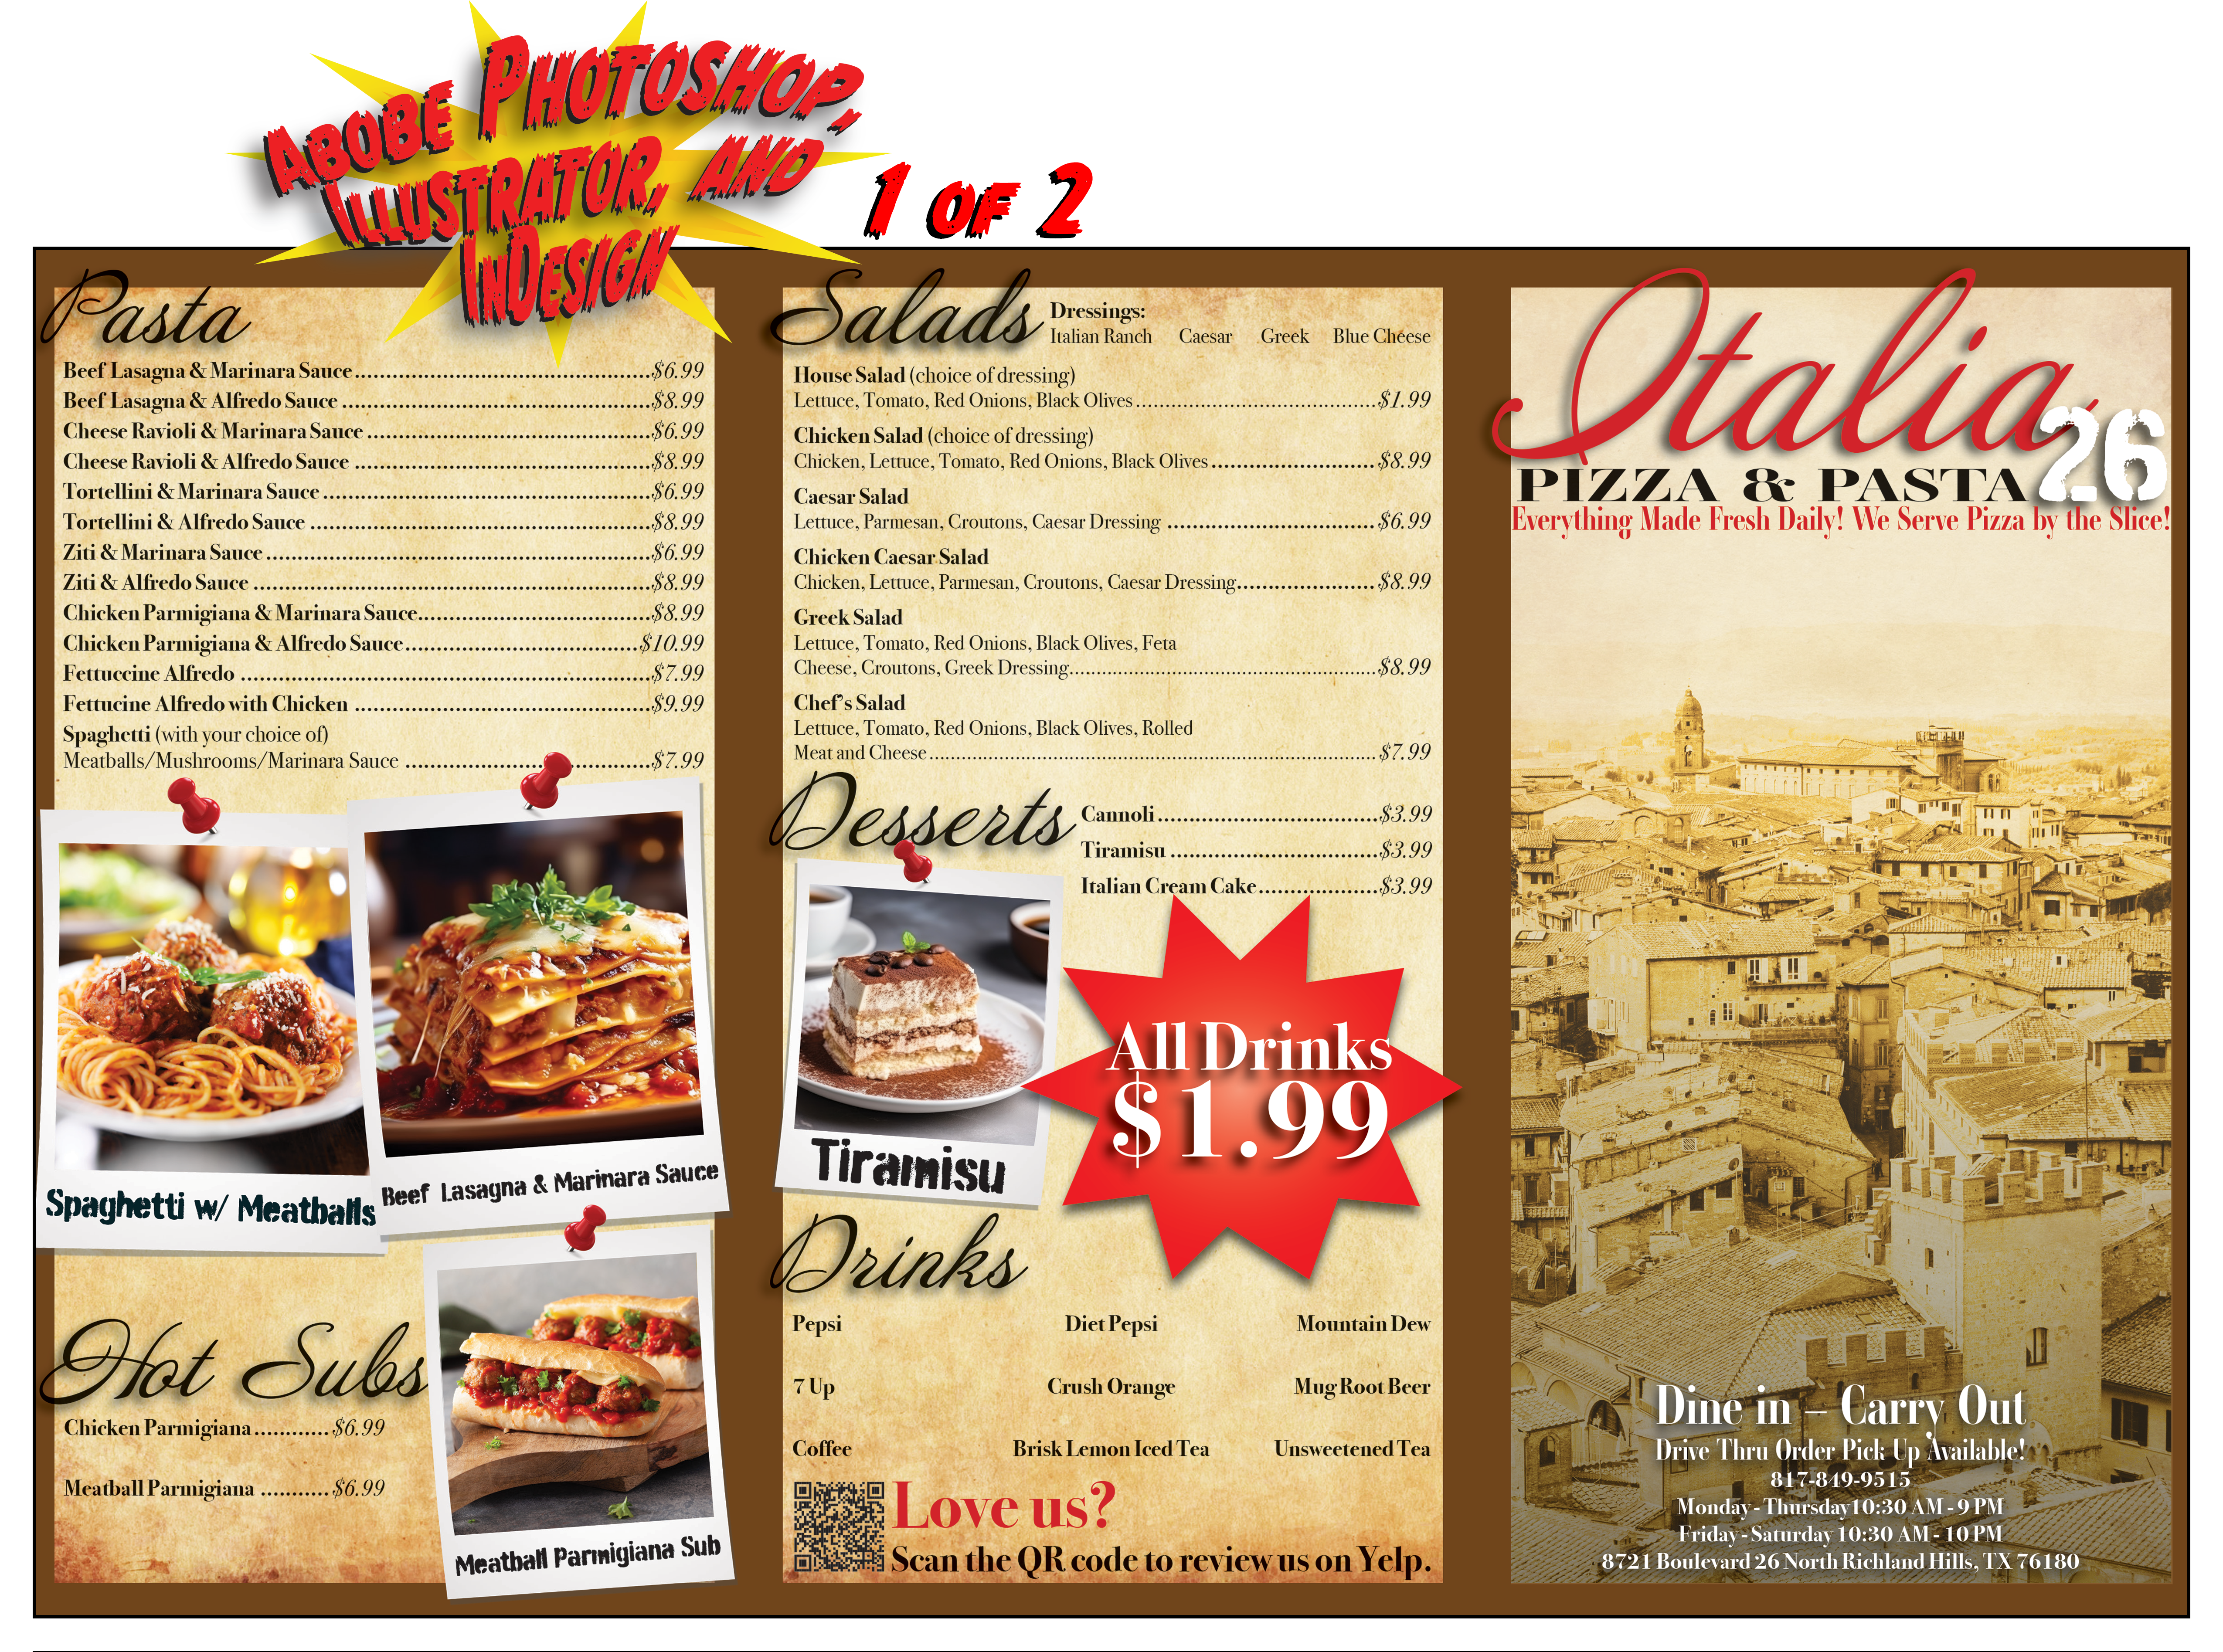 Menu for Italia 26. Part 1 of 2. Created with Adobe Photoshop, Illustrator, and InDesign.